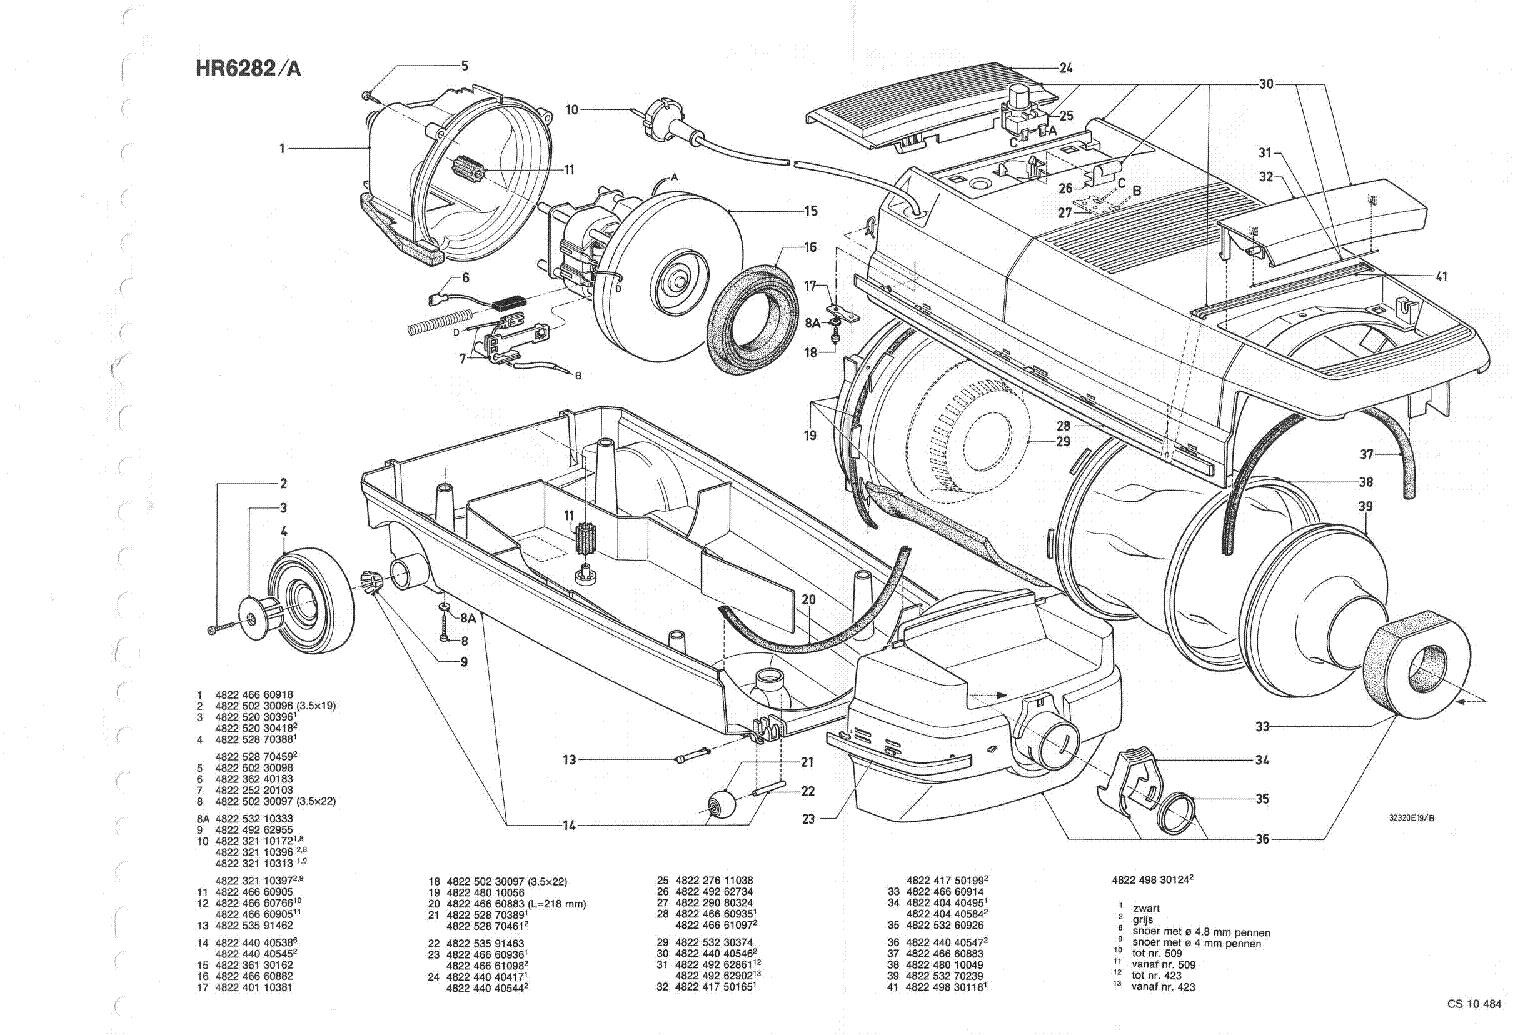 PHILIPS HR6282-A SM service manual (2nd page)